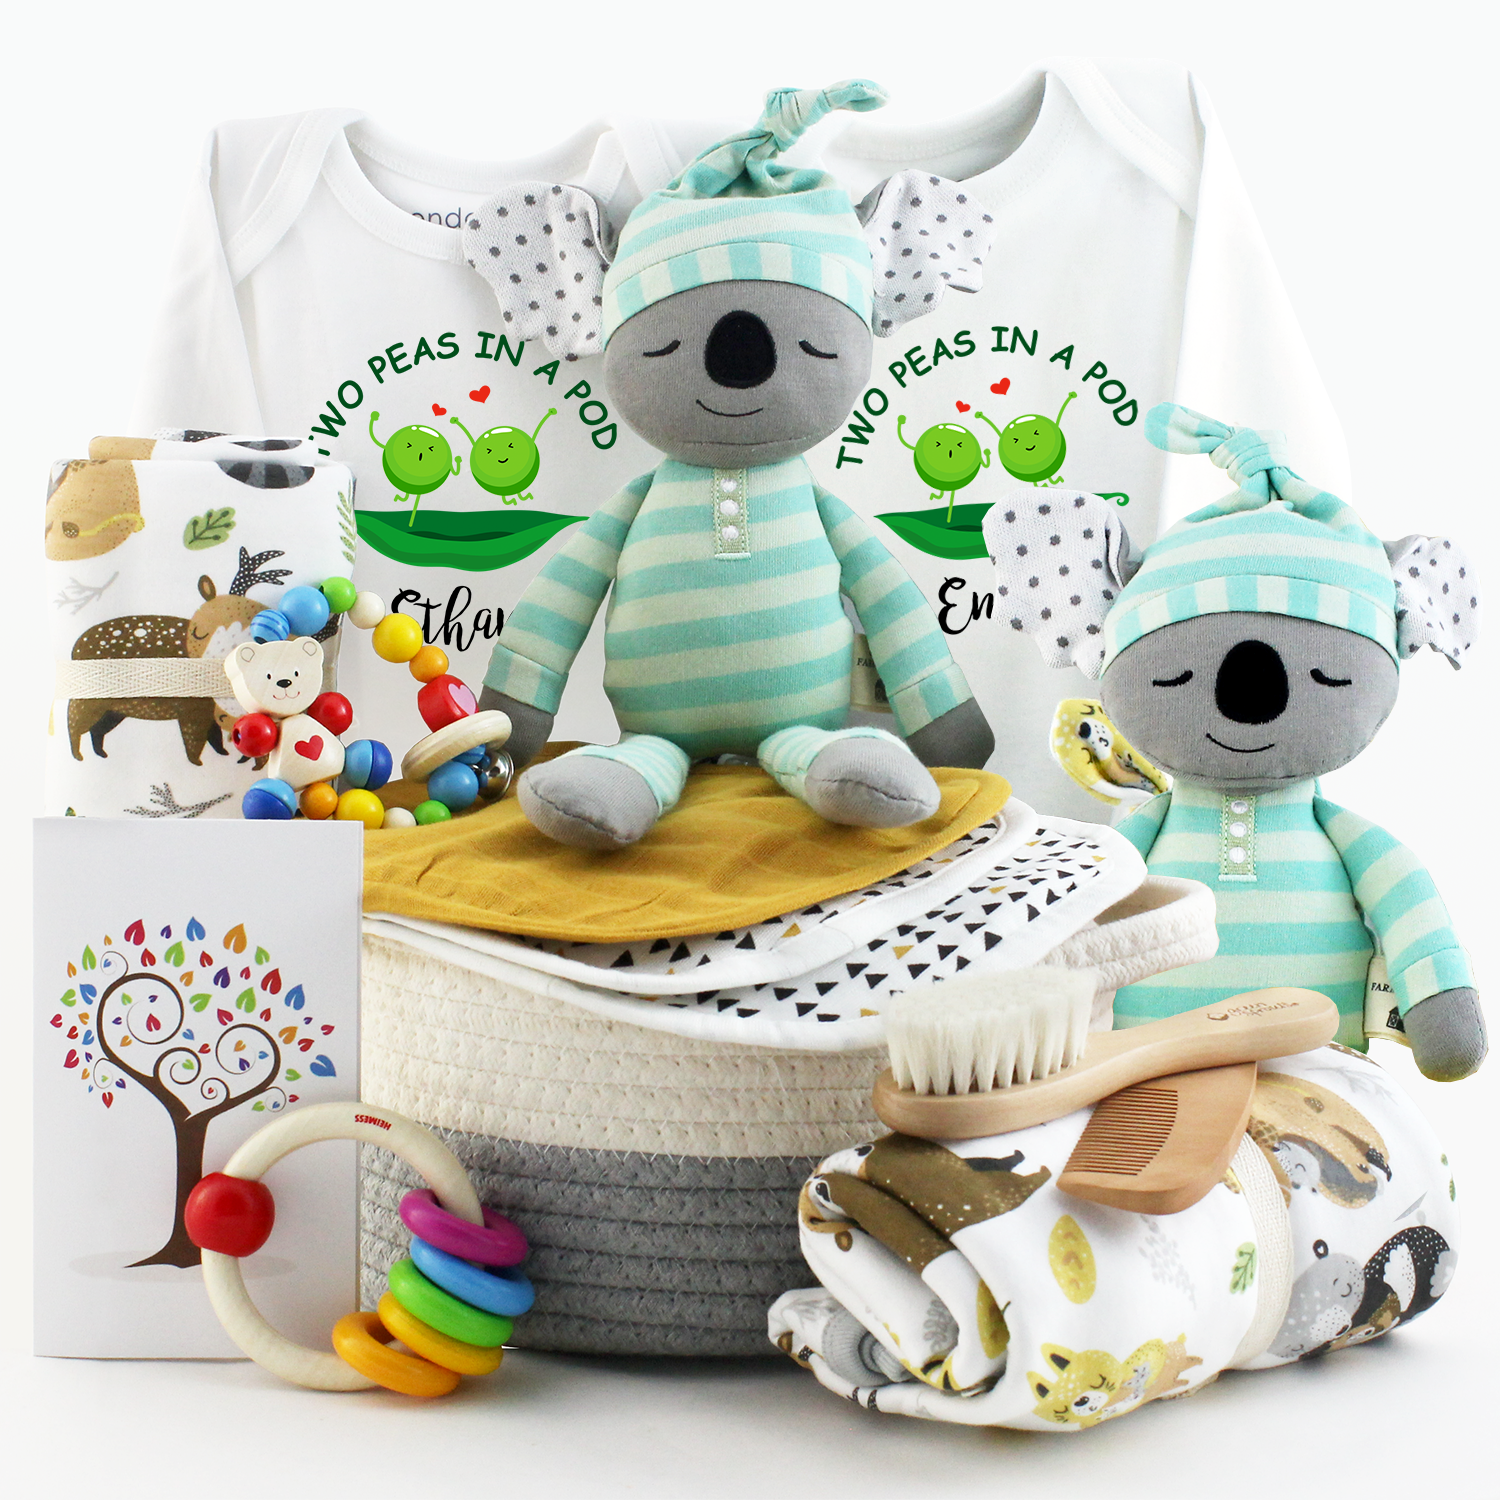 Zeronto Twin Baby Gift Basket - Two Peas in a Pod